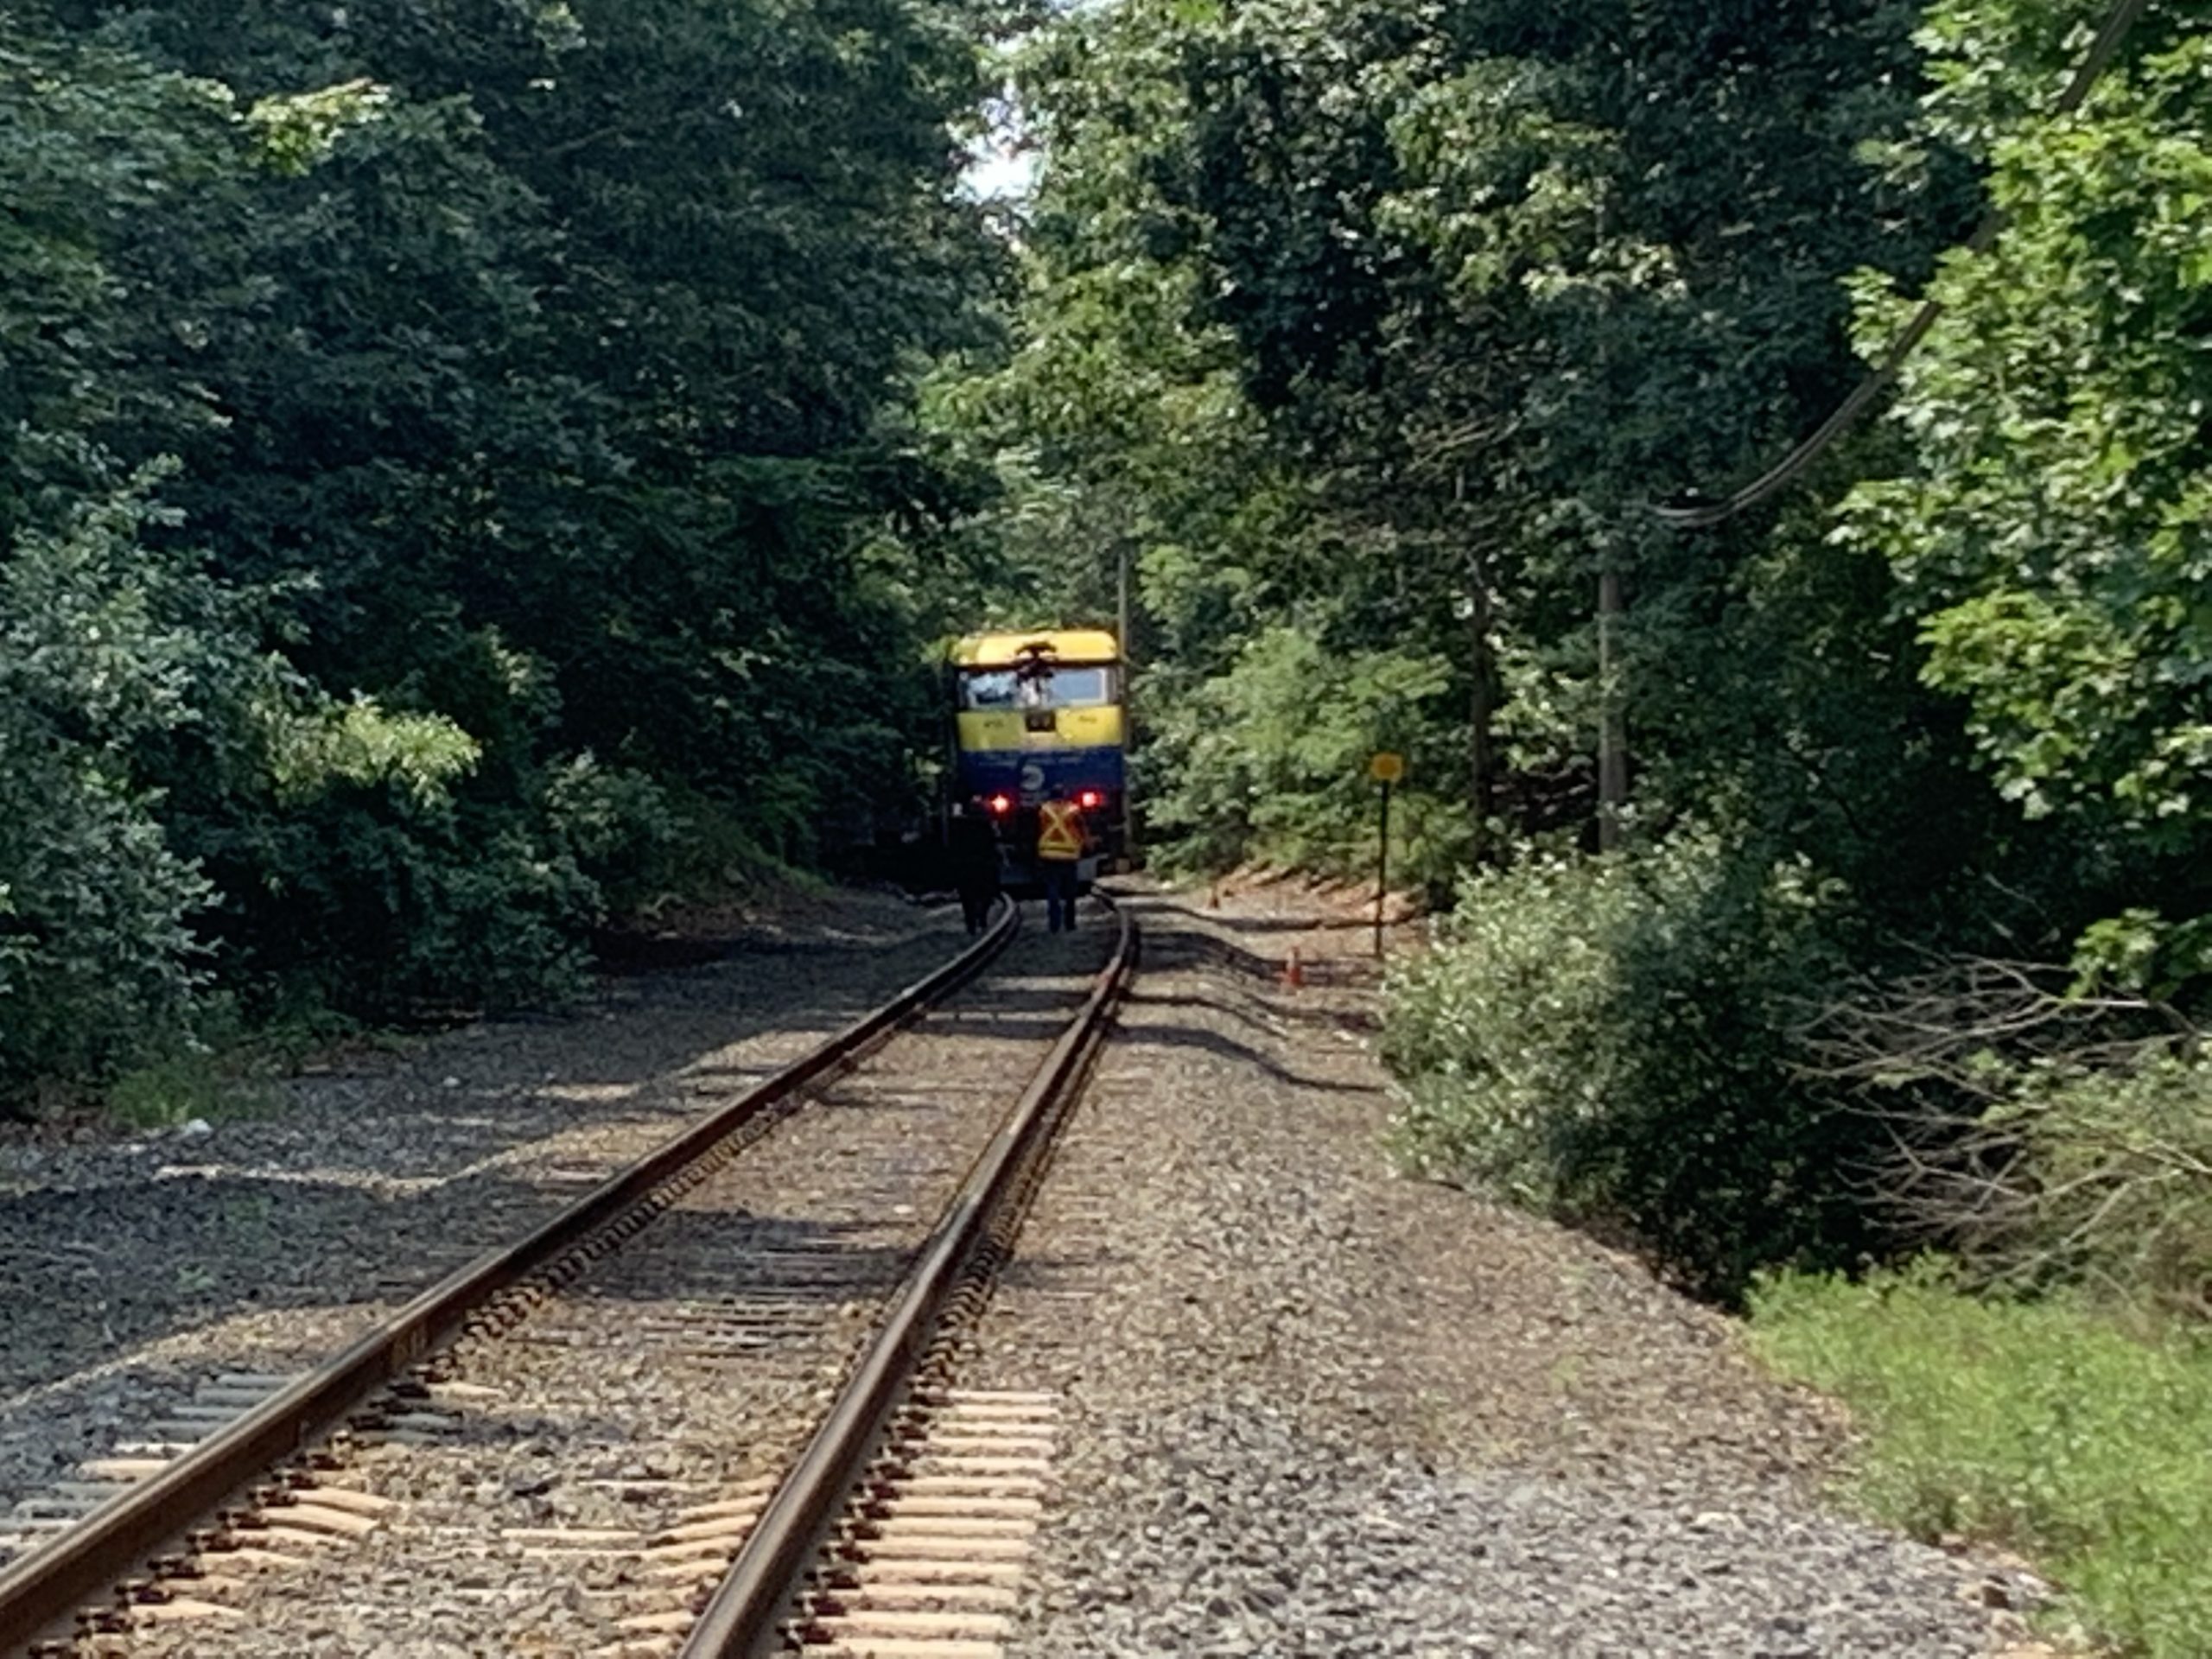 The train waits on the track during the accident investigation. Stephen J. Kotz